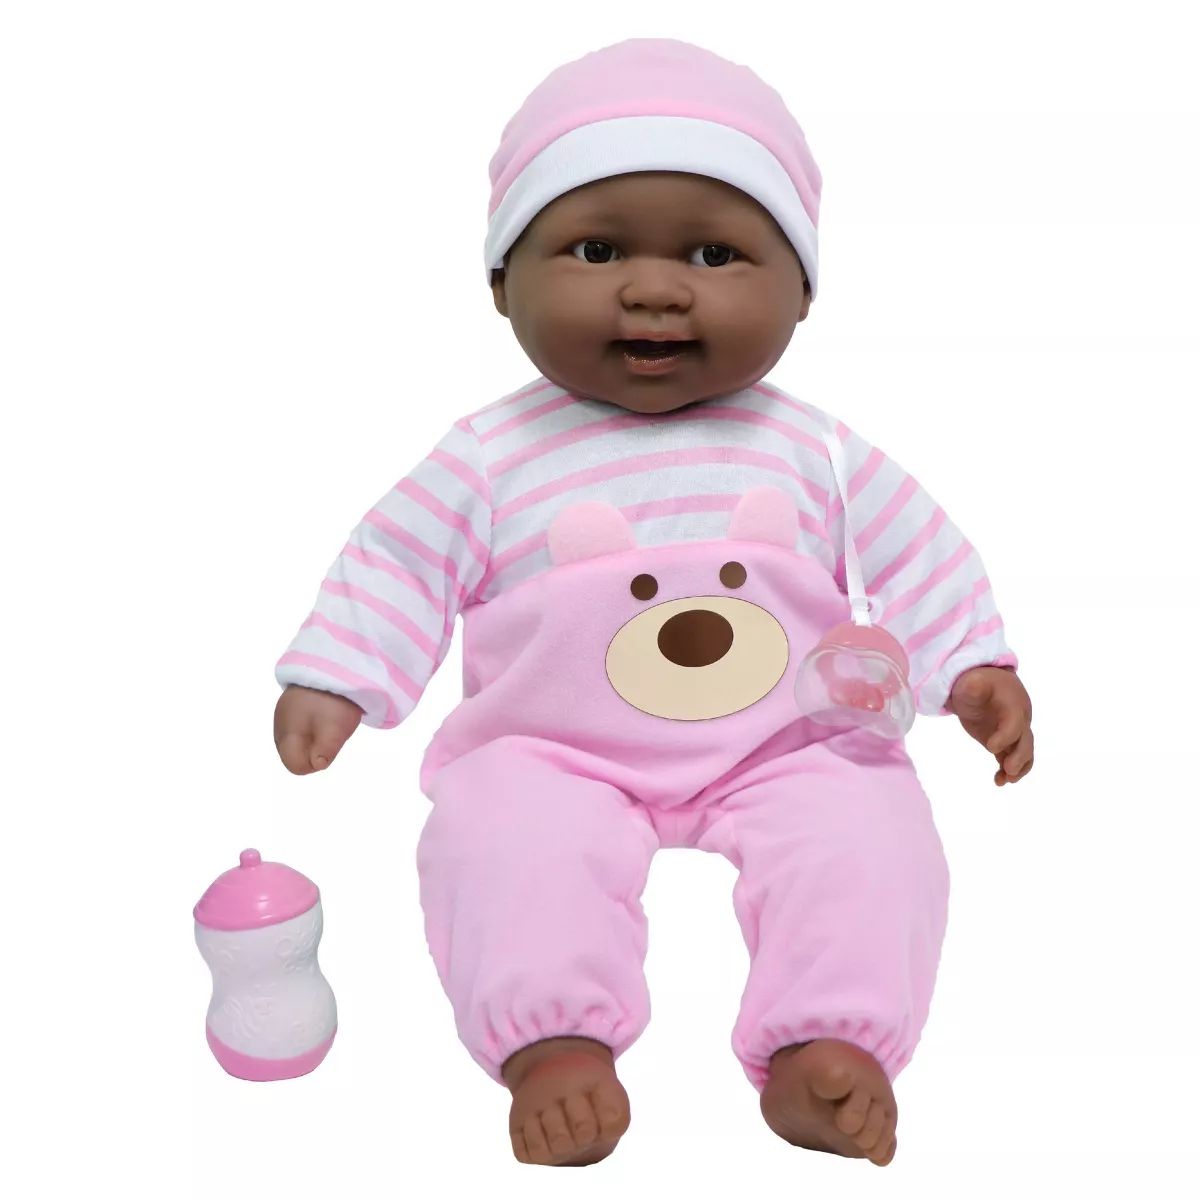 JC Toys Lots to Cuddle Babies 20" Soft Body Baby Doll | Target